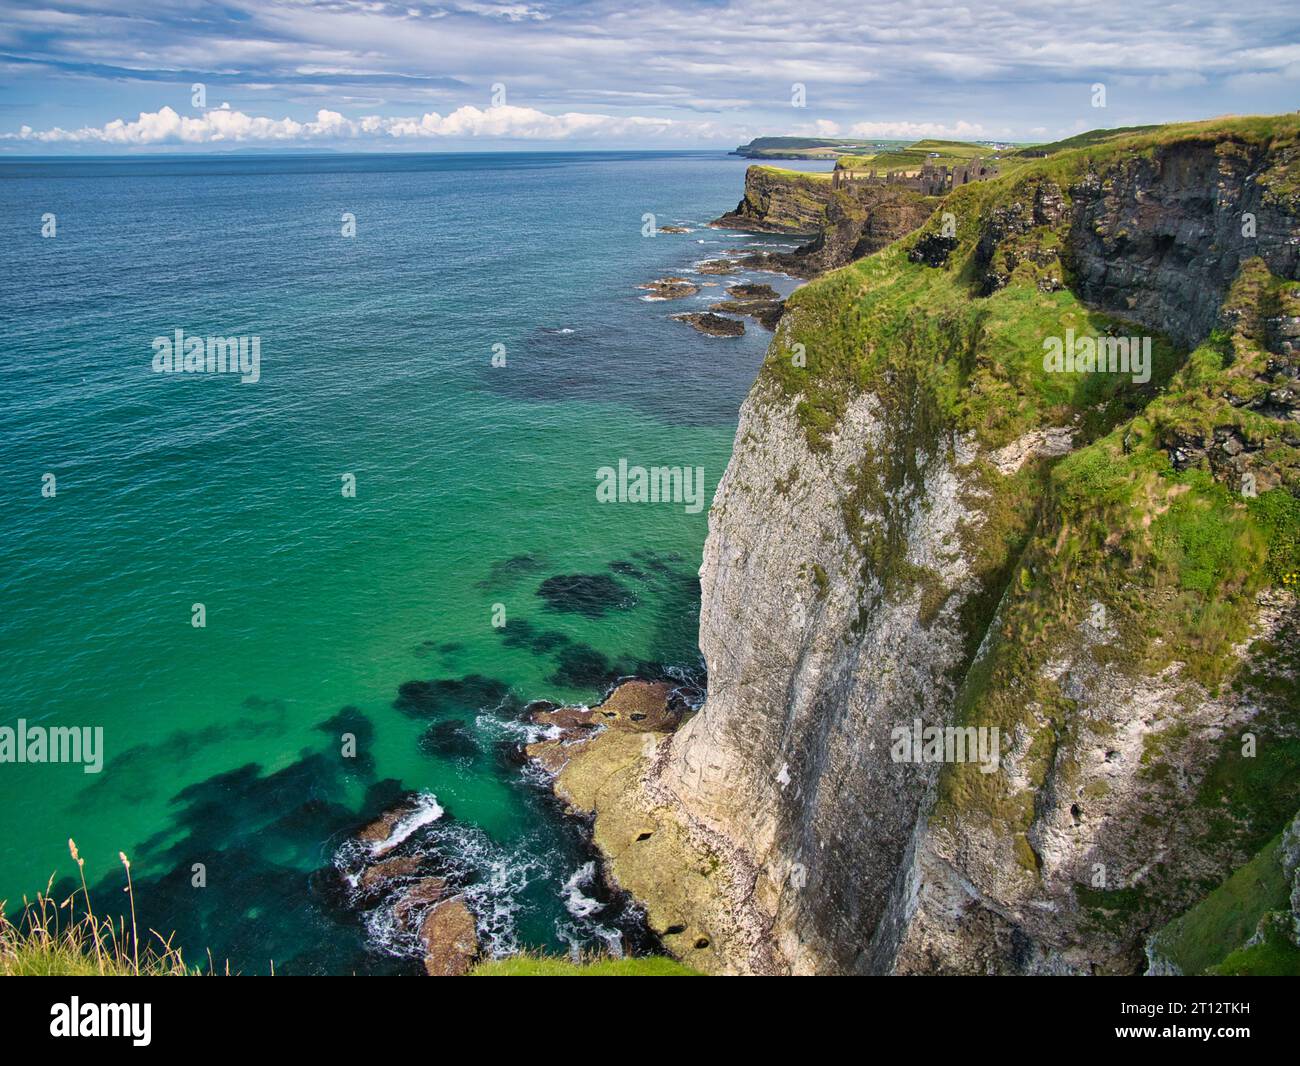 High coastal cliffs on the Antrim Coast, near Giant's Causeway, Northern Ireland. The ruins of Dunluce Castle appear in the background. Stock Photo